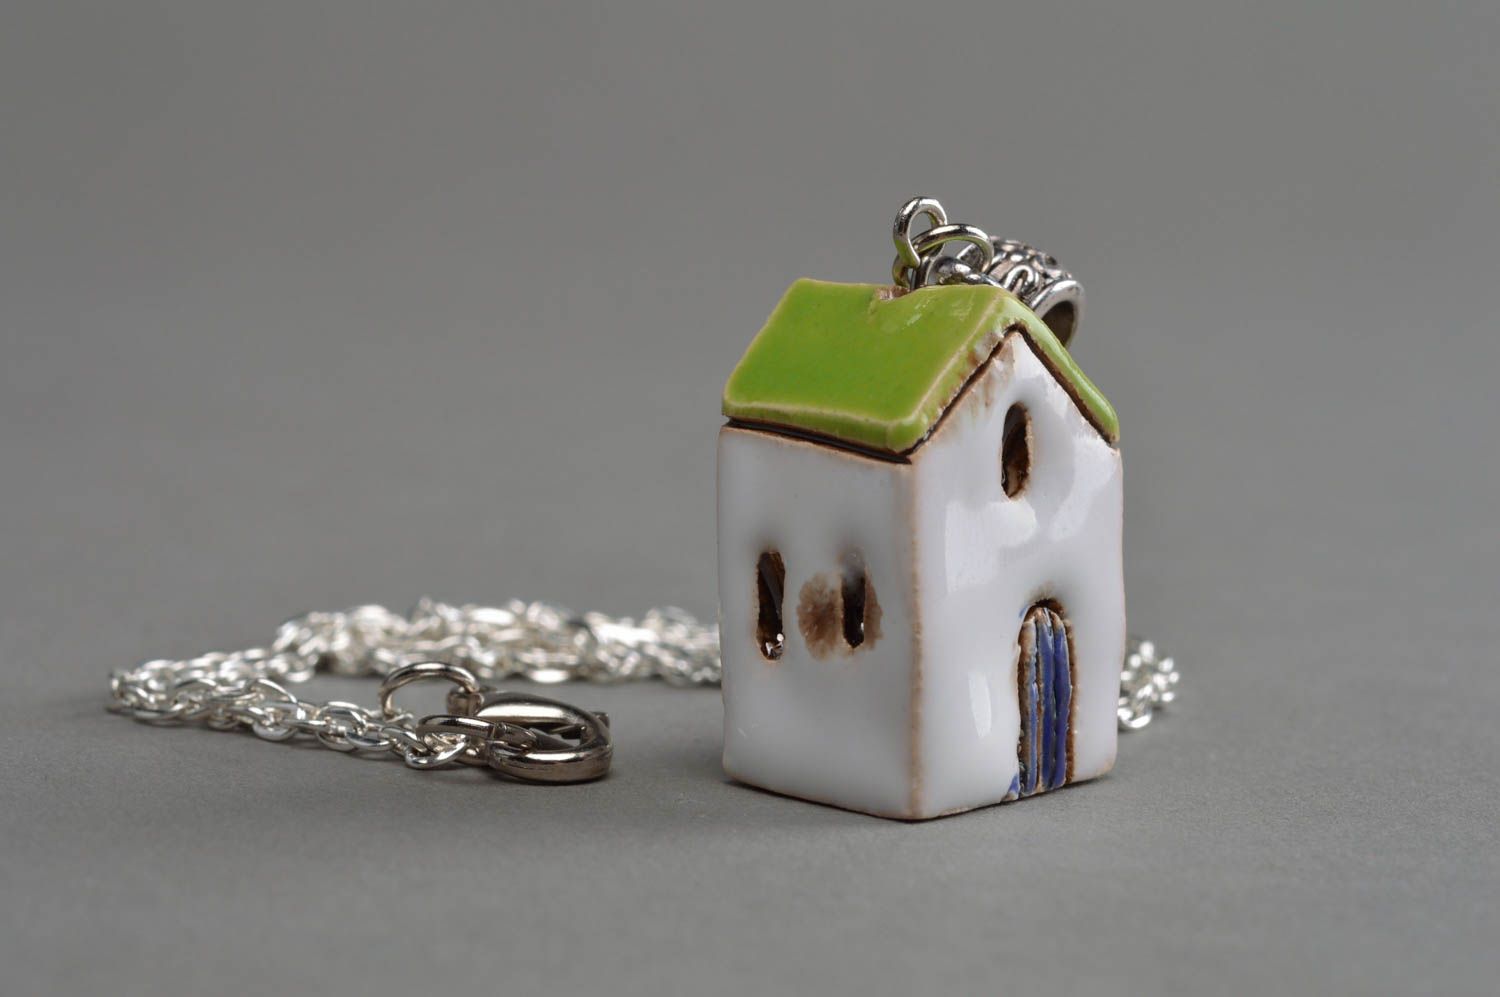 Handmade designer ceramic pendant necklace white house with green roof on chain photo 1